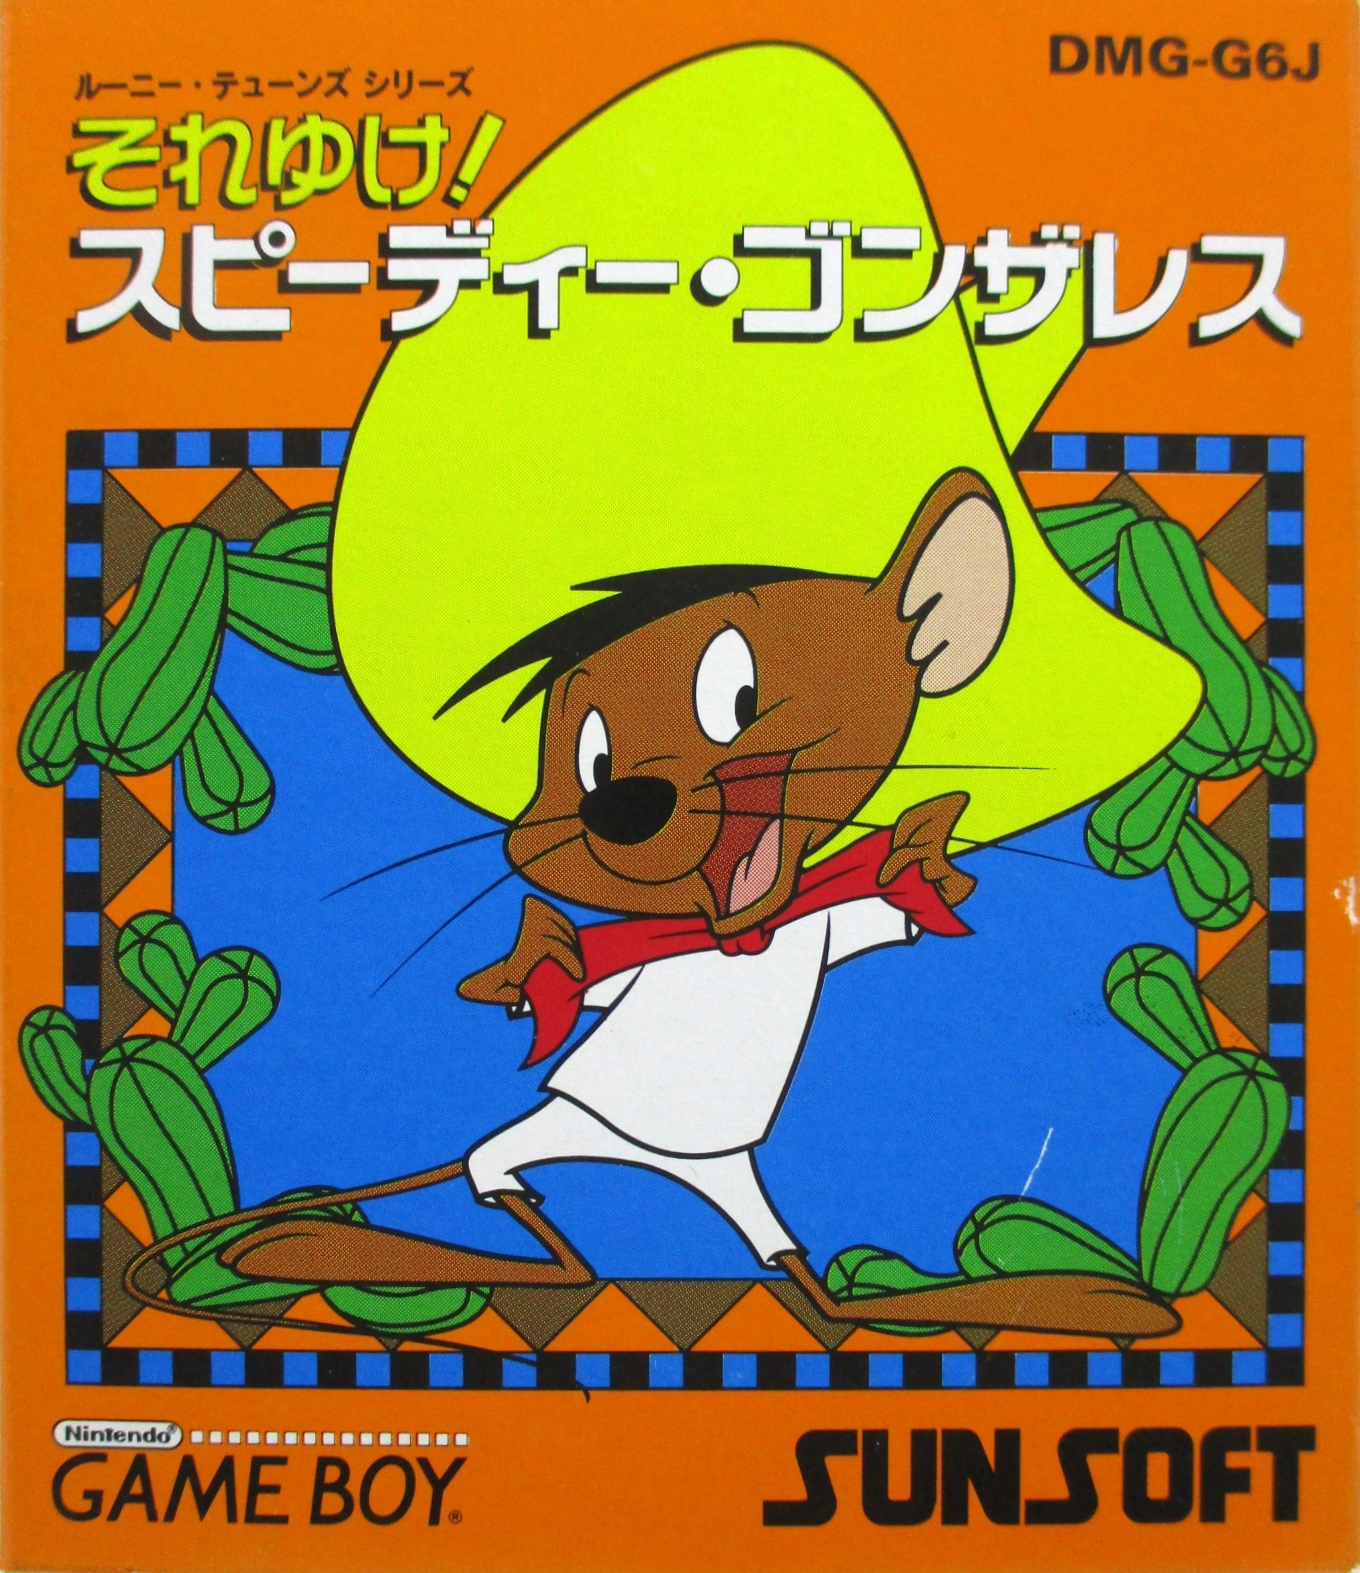 Speedy Gonzales Images - LaunchBox Games Database